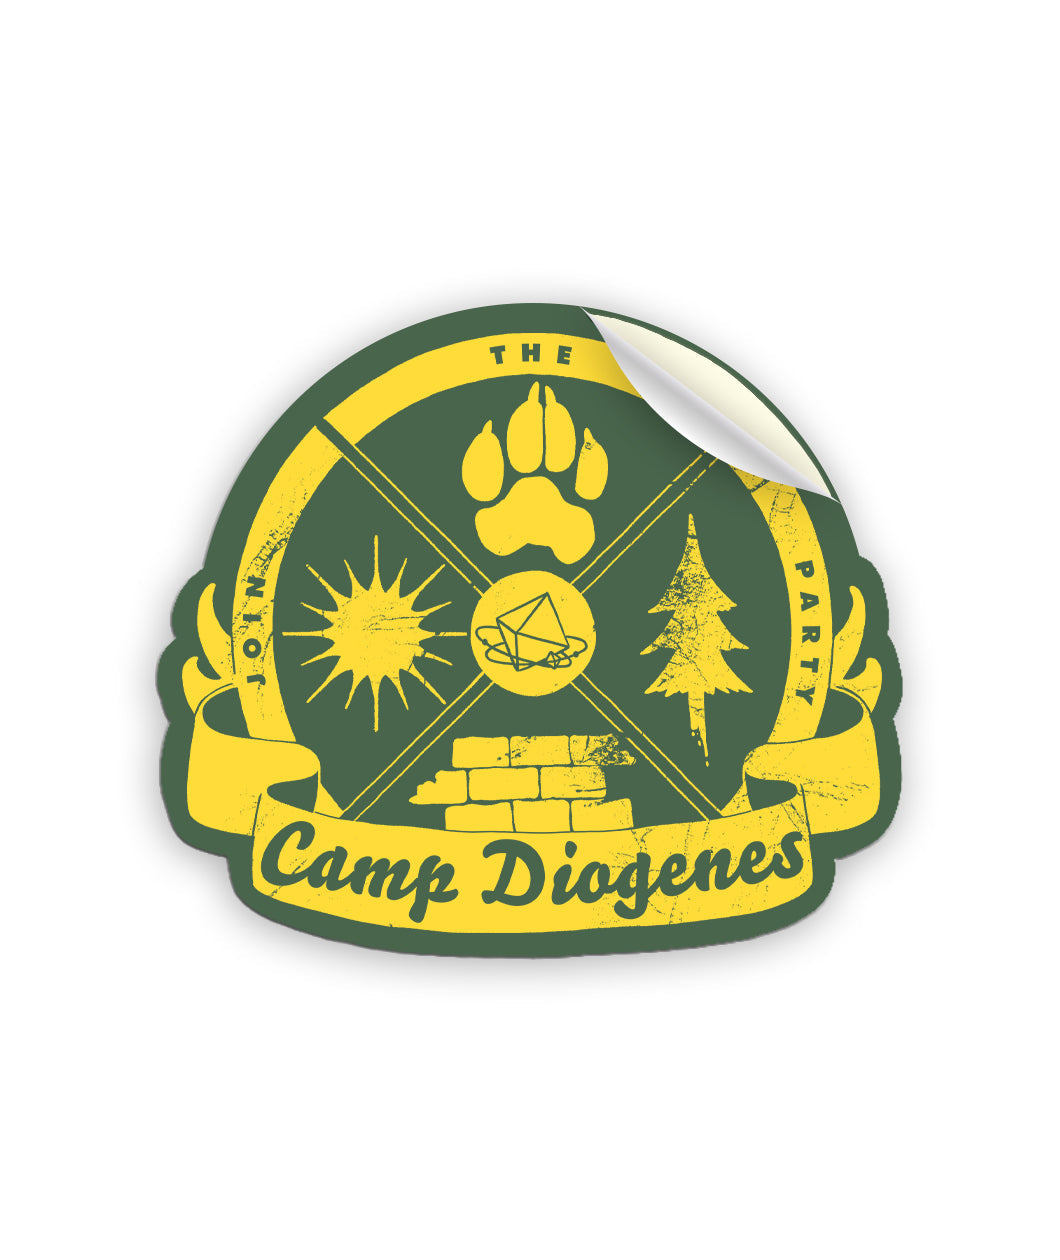 A sticker of a yellow crest on a dark green background that reads 